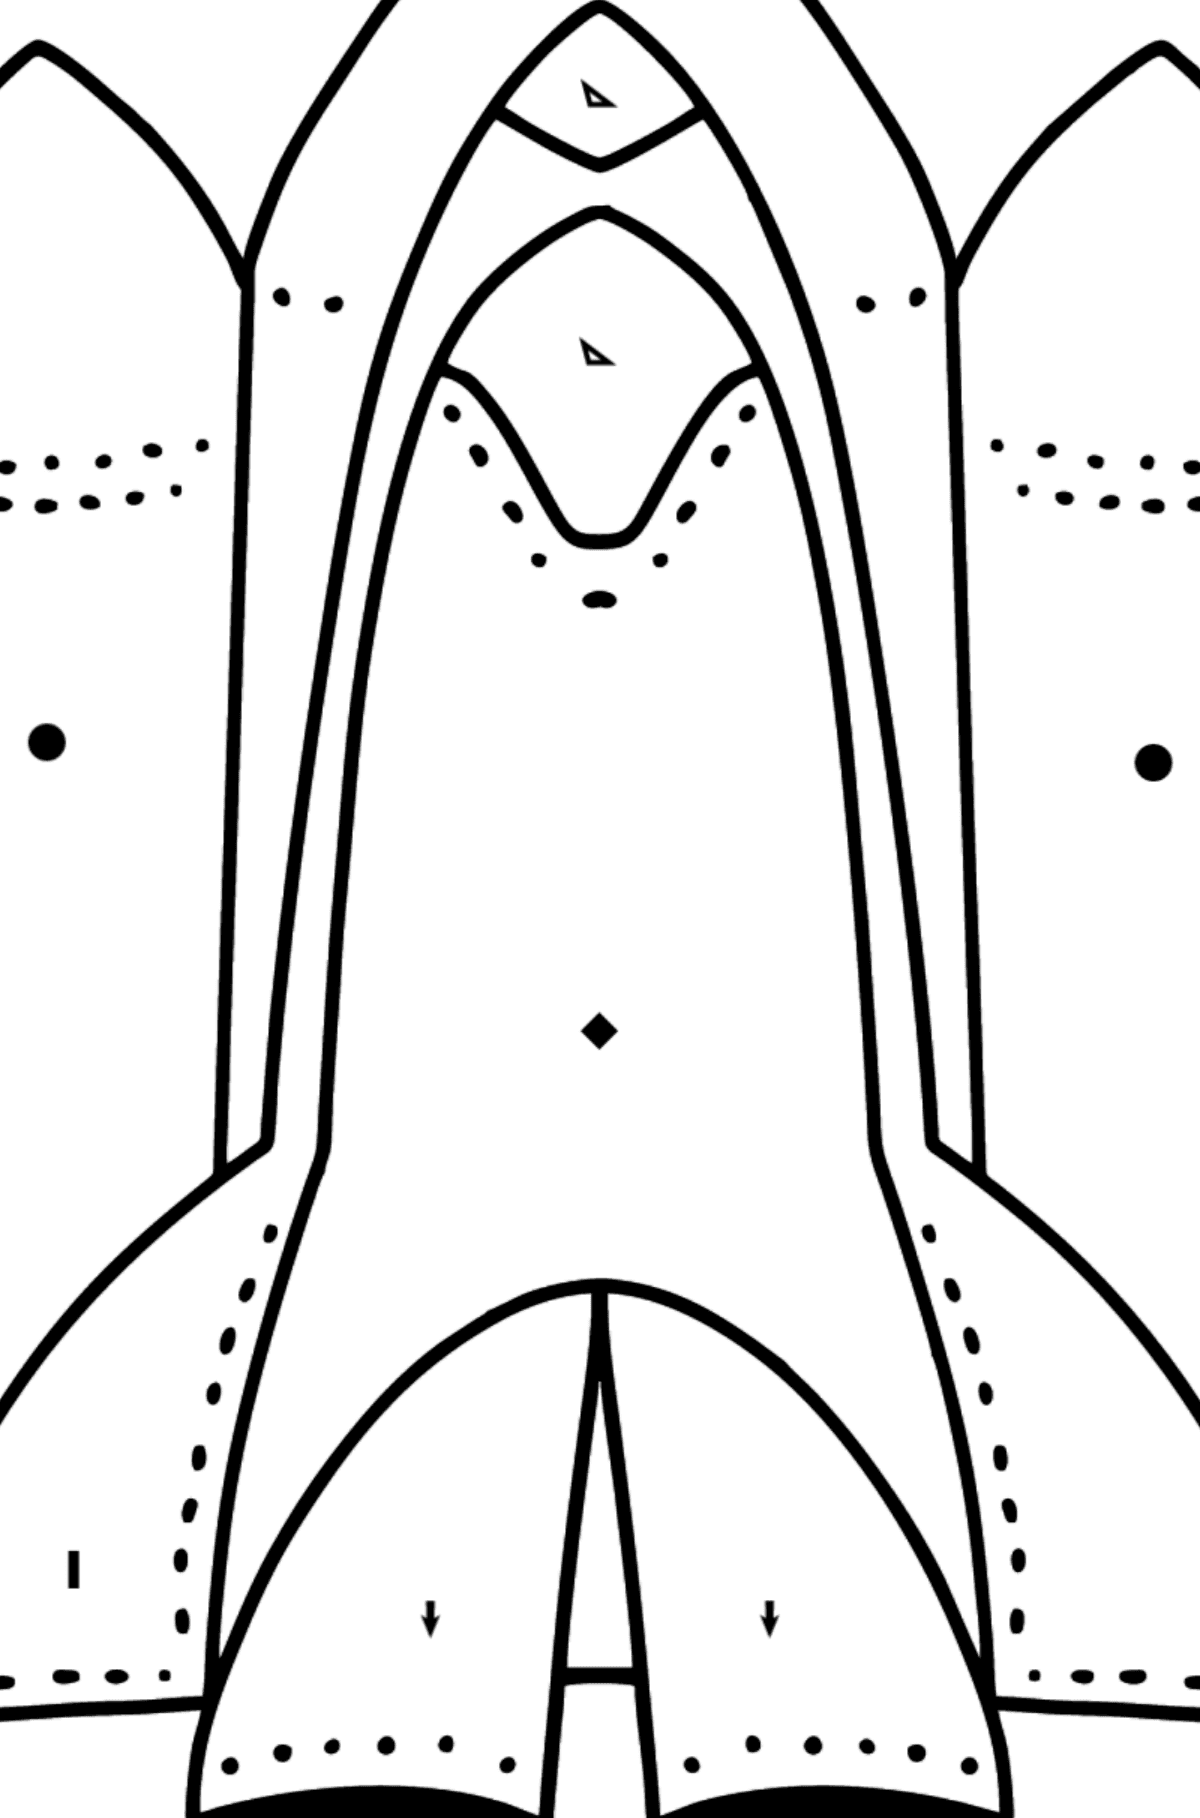 Shuttle coloring page - Coloring by Symbols and Geometric Shapes for Kids